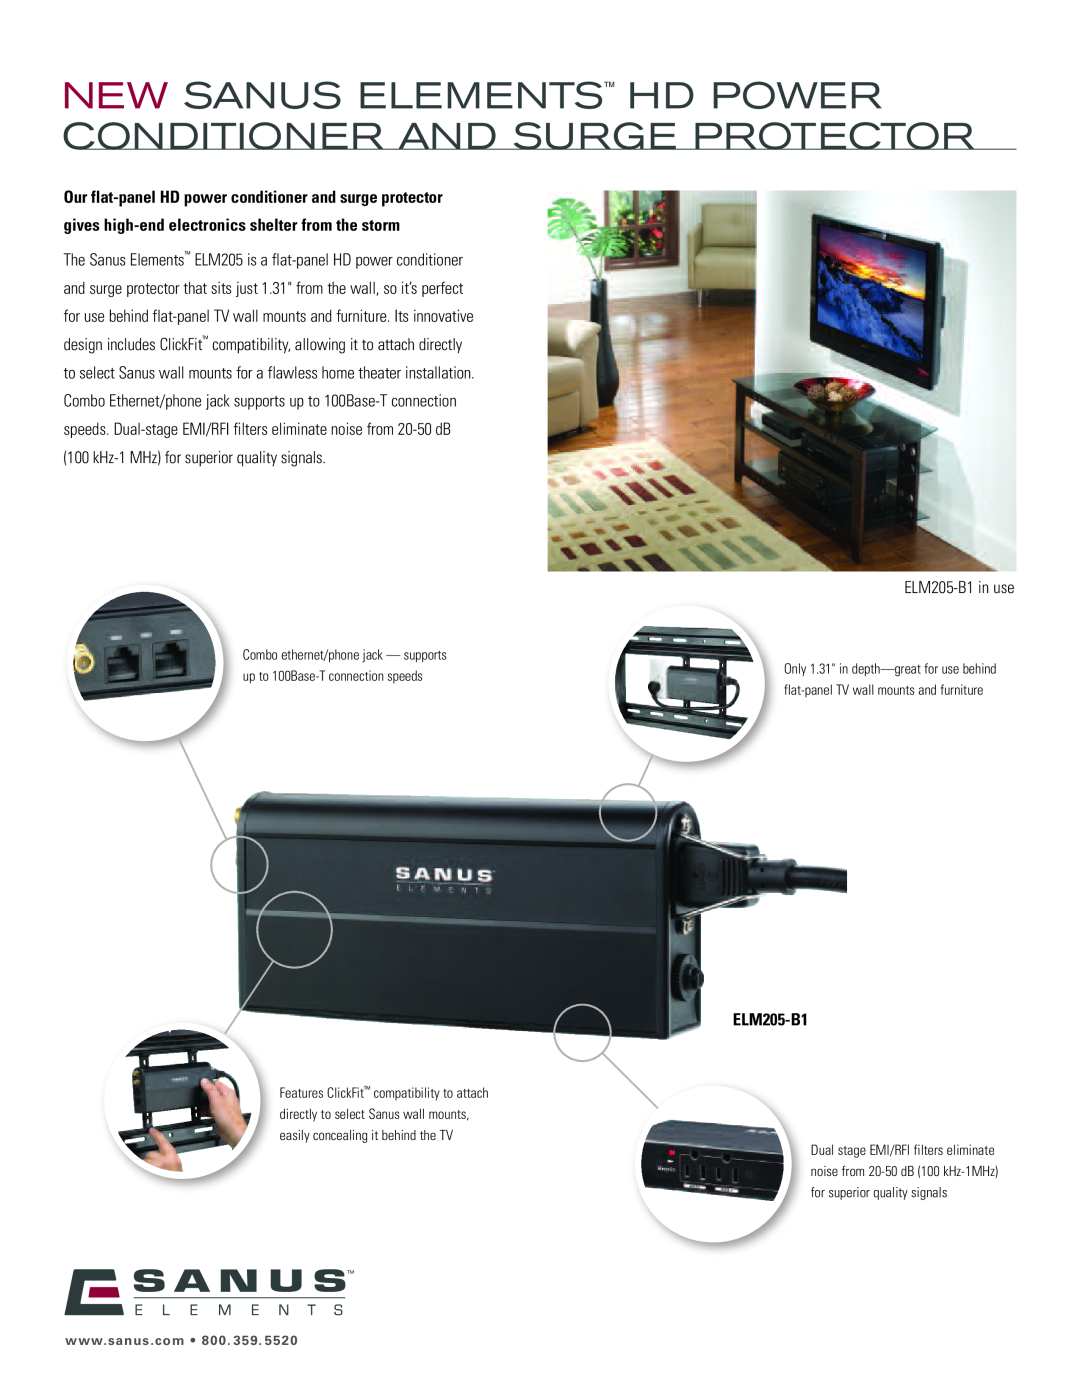 Sanus Systems manual New Sanus Elements Hd Power Conditioner And Surge Protector, ELM205-B1 in use 